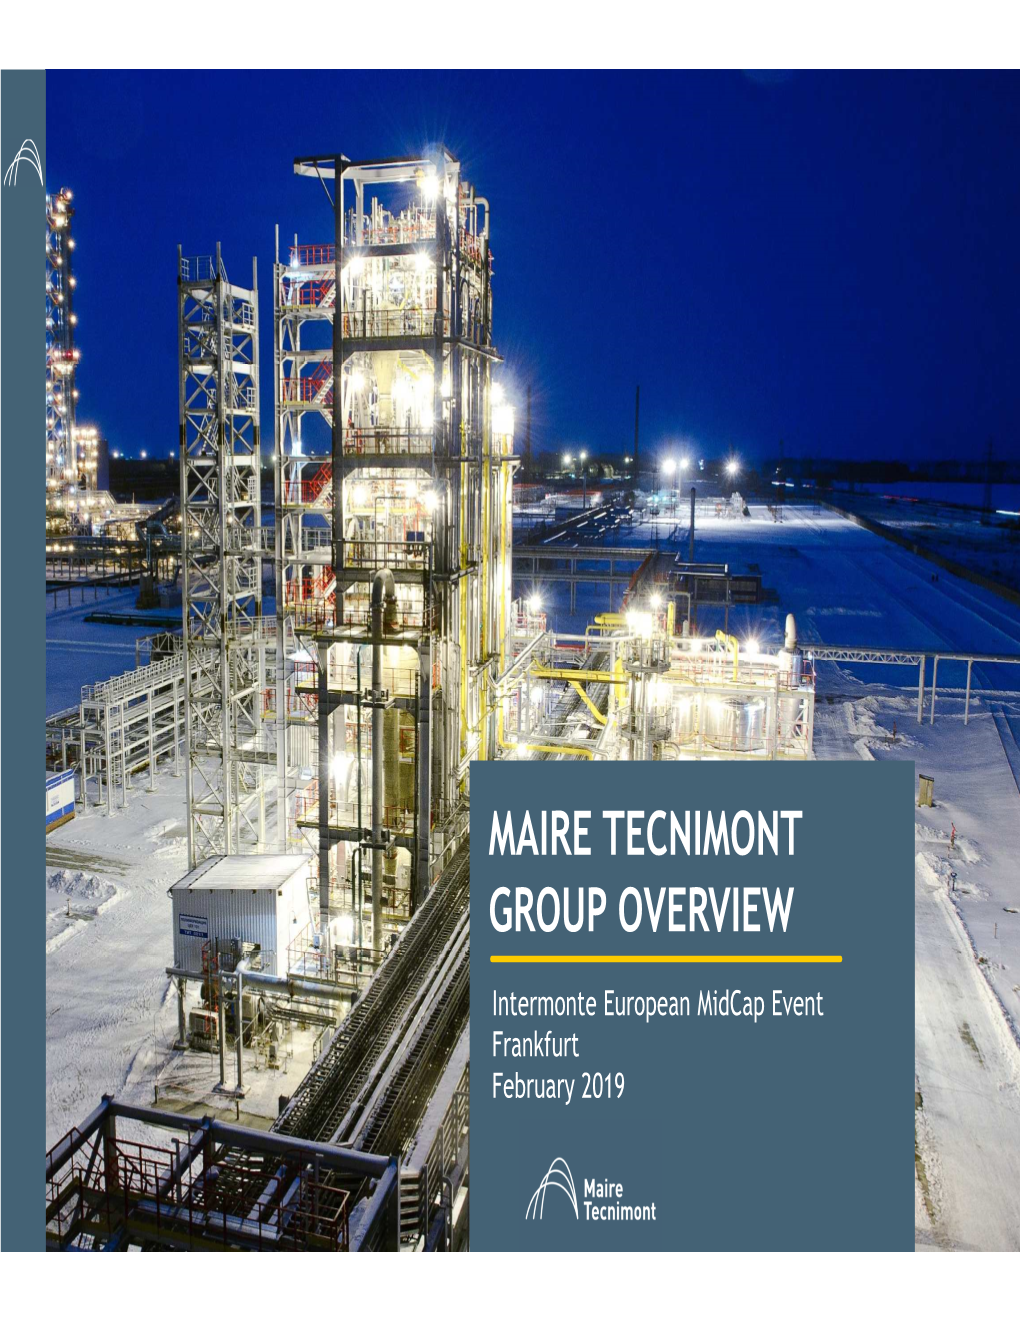 Maire Tecnimont Group Overview